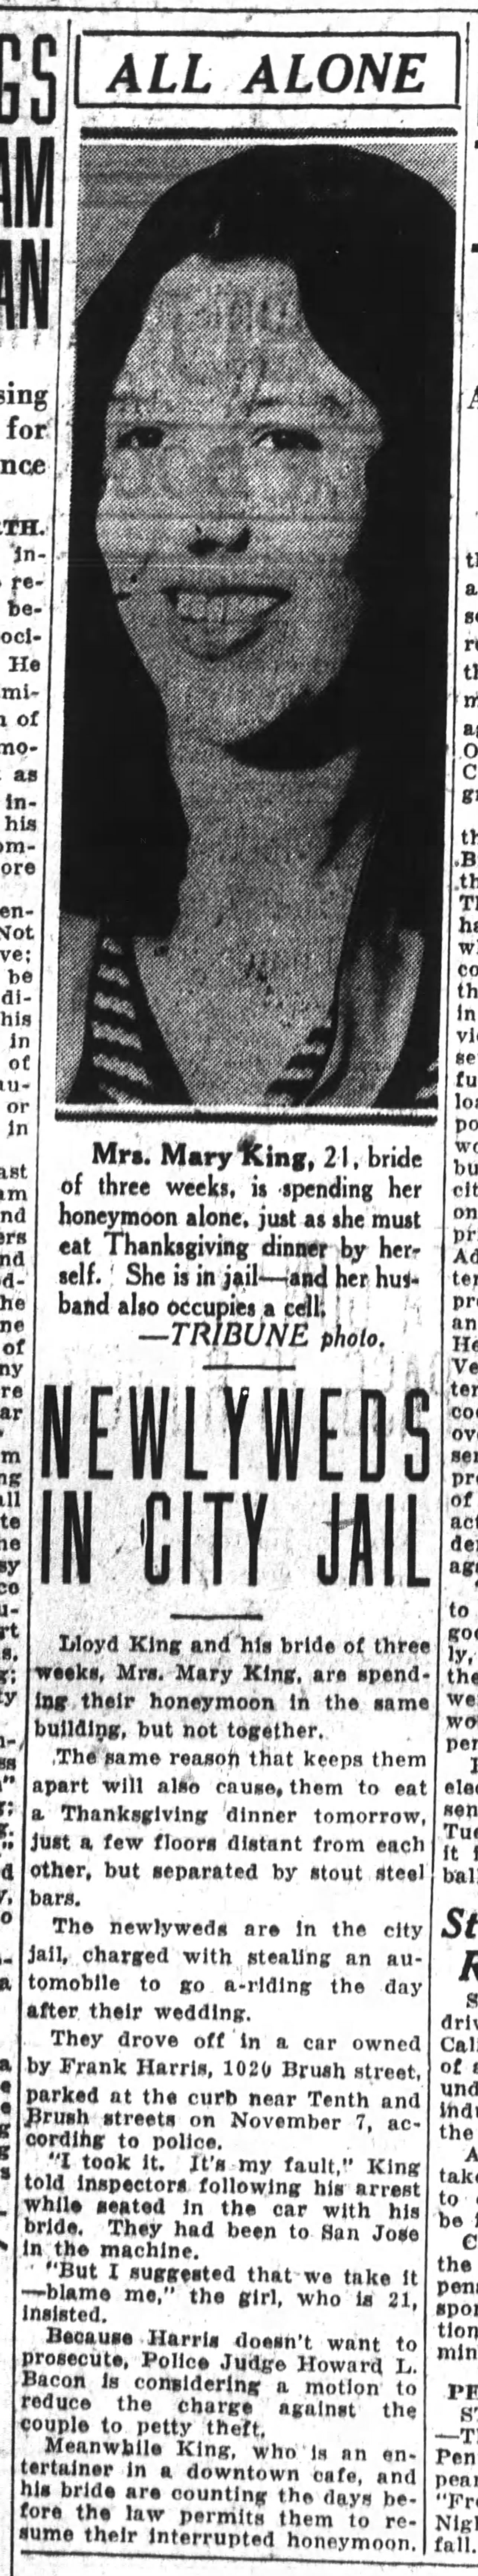 Article about Lloyd and Mary King stealing a car on their honeymoon